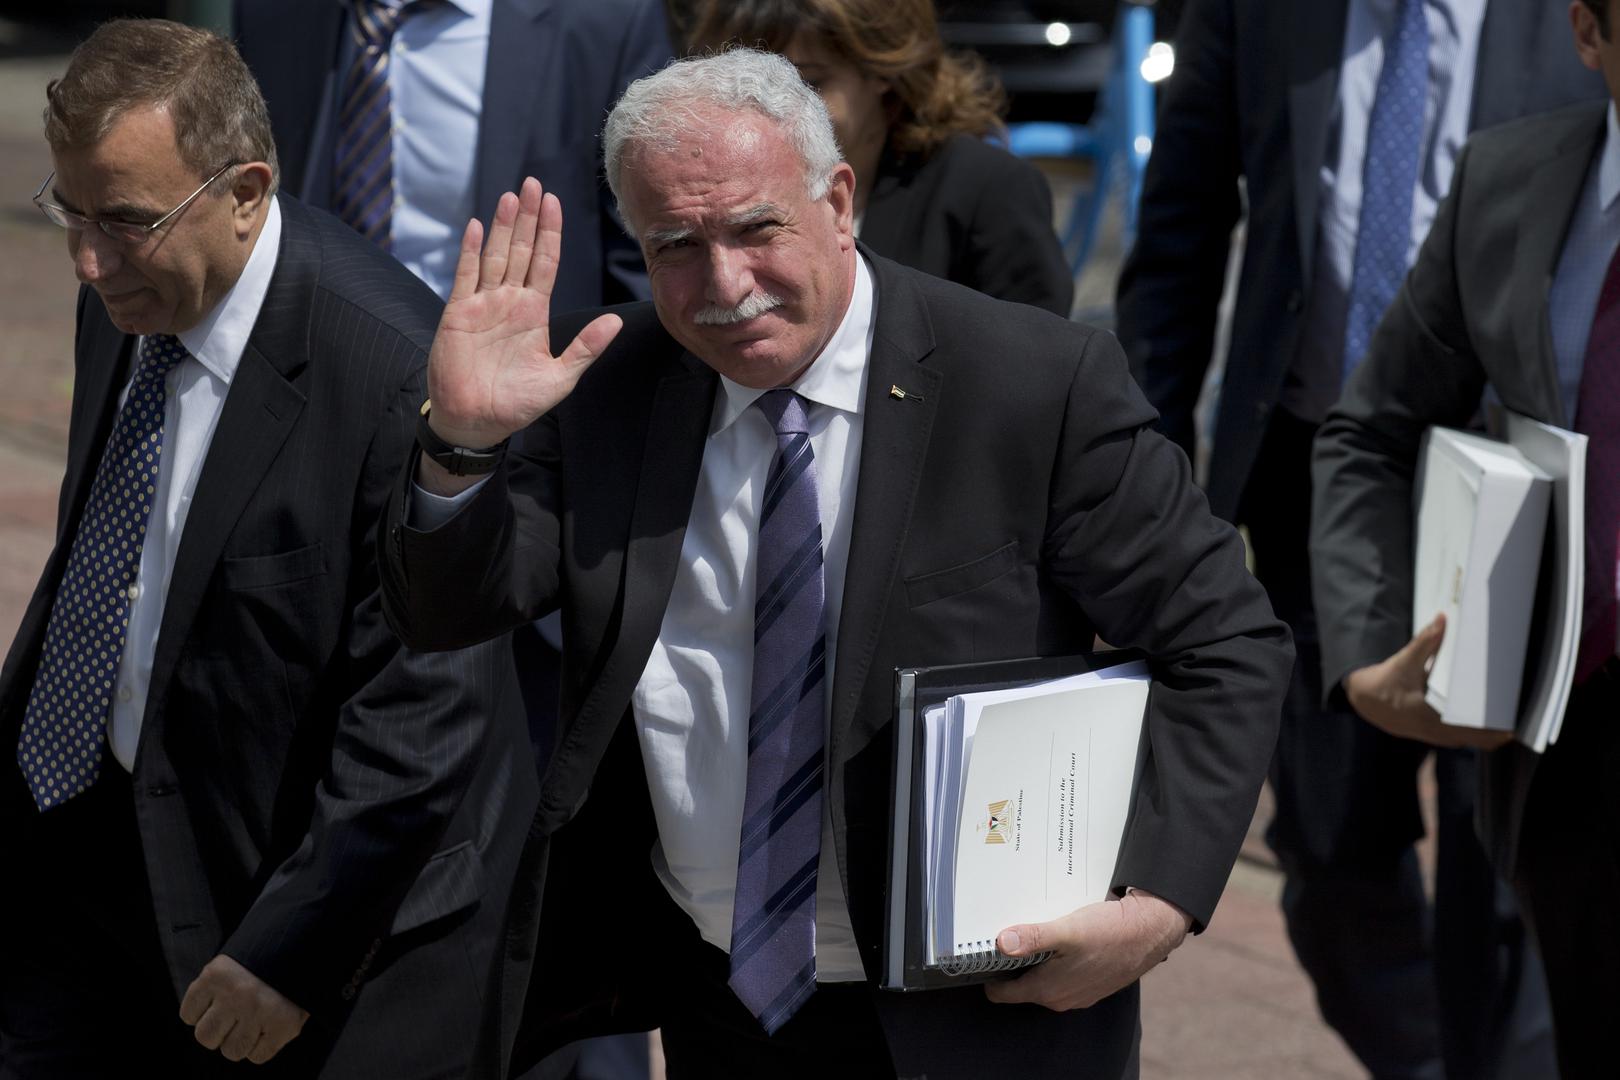 Palestine: ICC Should Open Formal Probe | Human Rights Watch